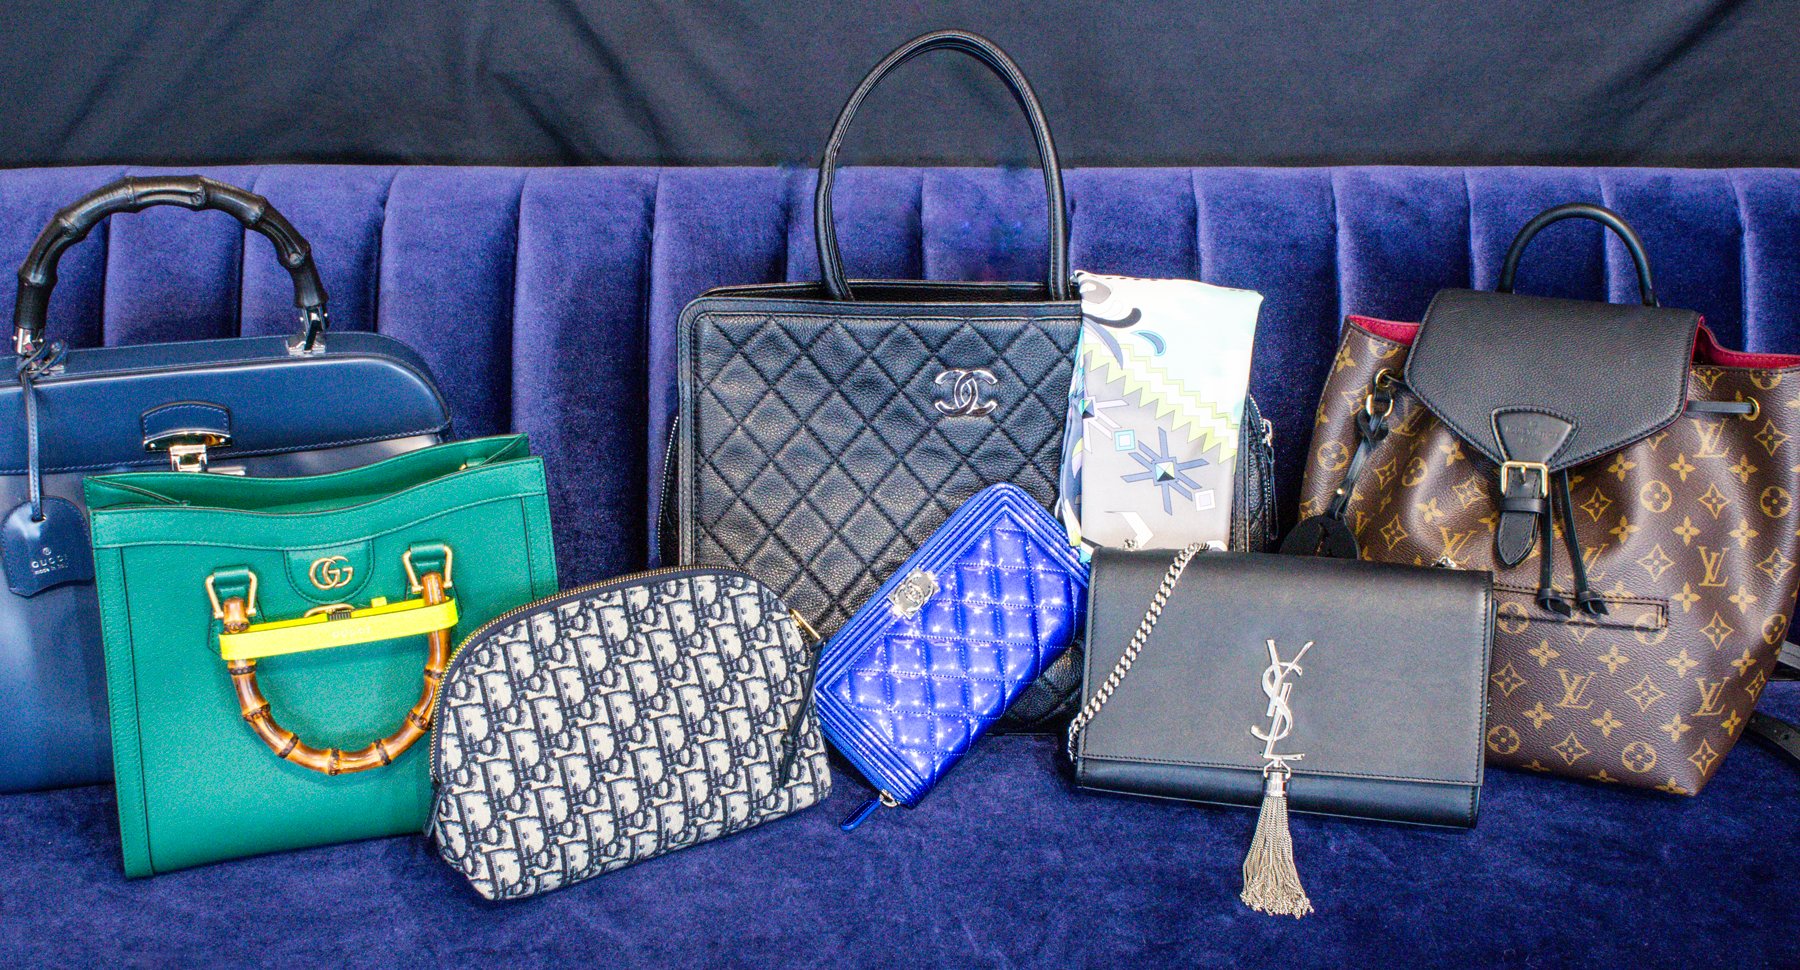 A collection of luxury handbags available to purchase from The Vault Luxury Resale, organized on a couch. The bags are Gucci, Dior, Chanel, Saint Laurent, and Louis Vuitton.